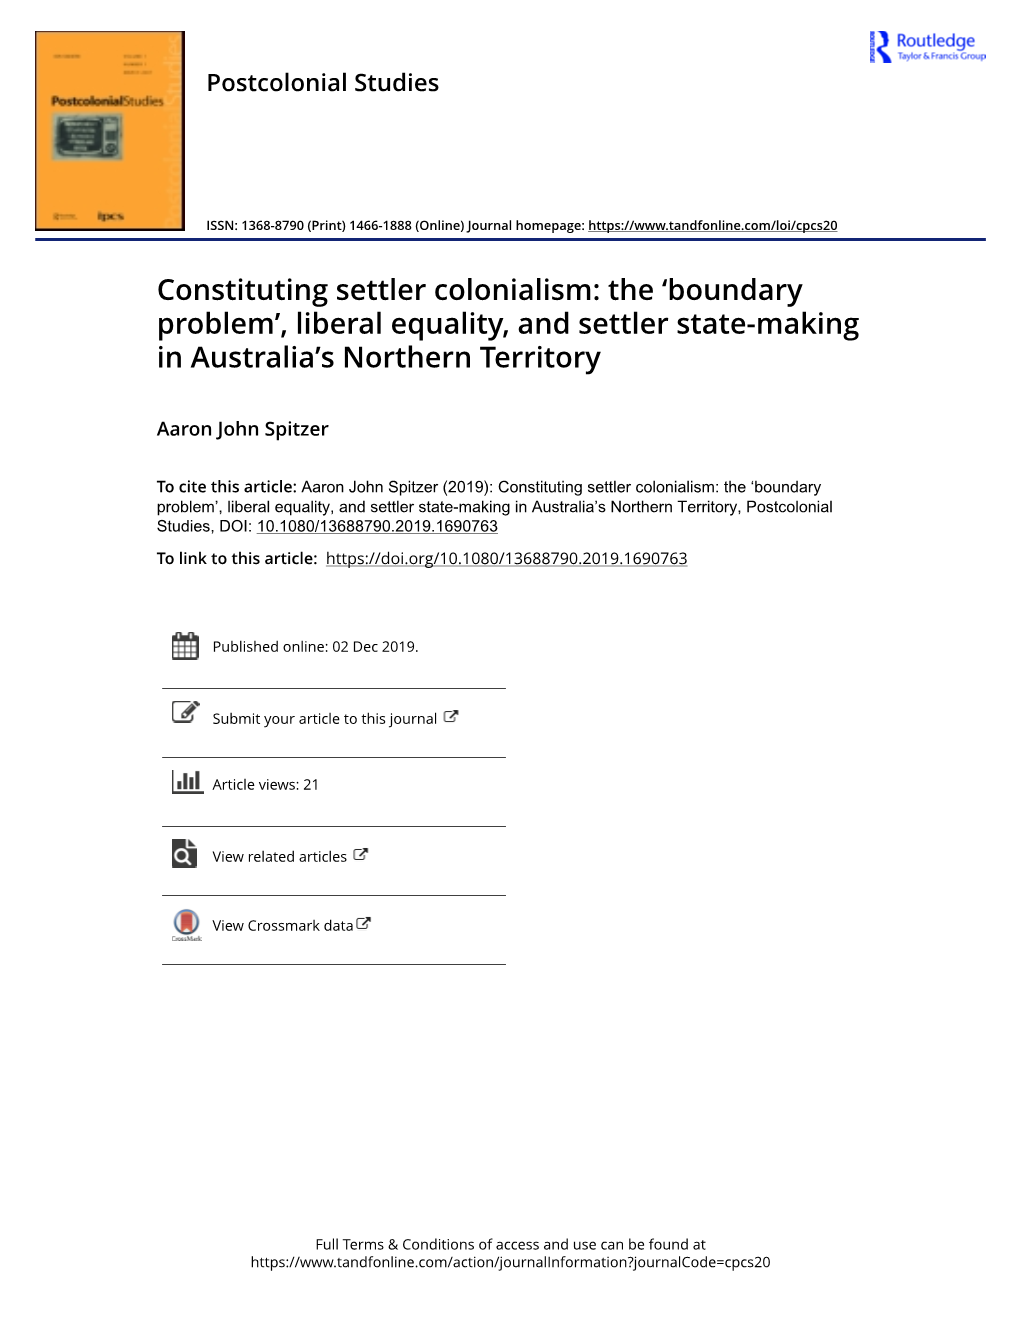 Constituting Settler Colonialism: the ‘Boundary Problem’, Liberal Equality, and Settler State-Making in Australia’S Northern Territory